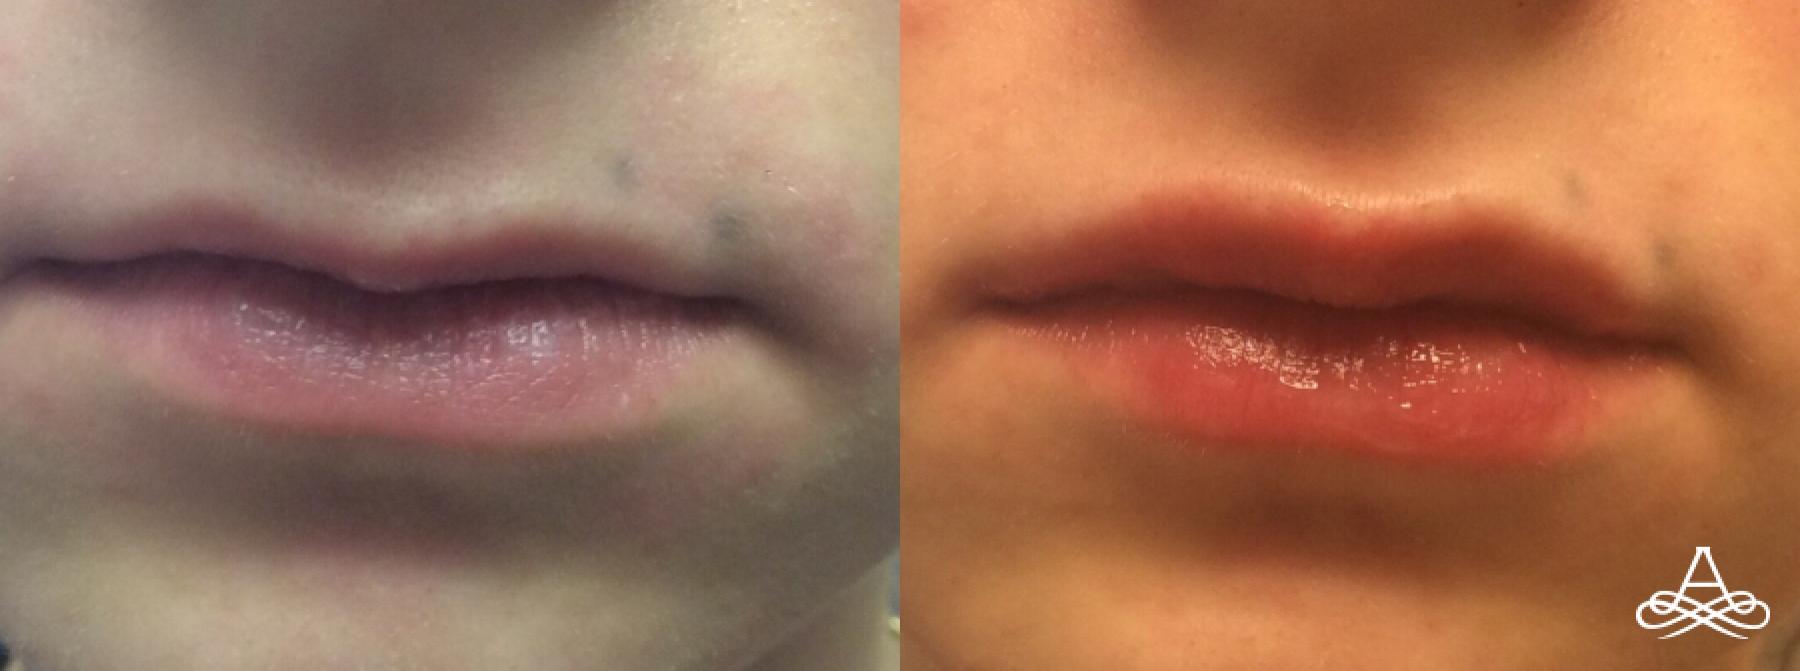 Lip Filler: Patient 8 - Before and After 1